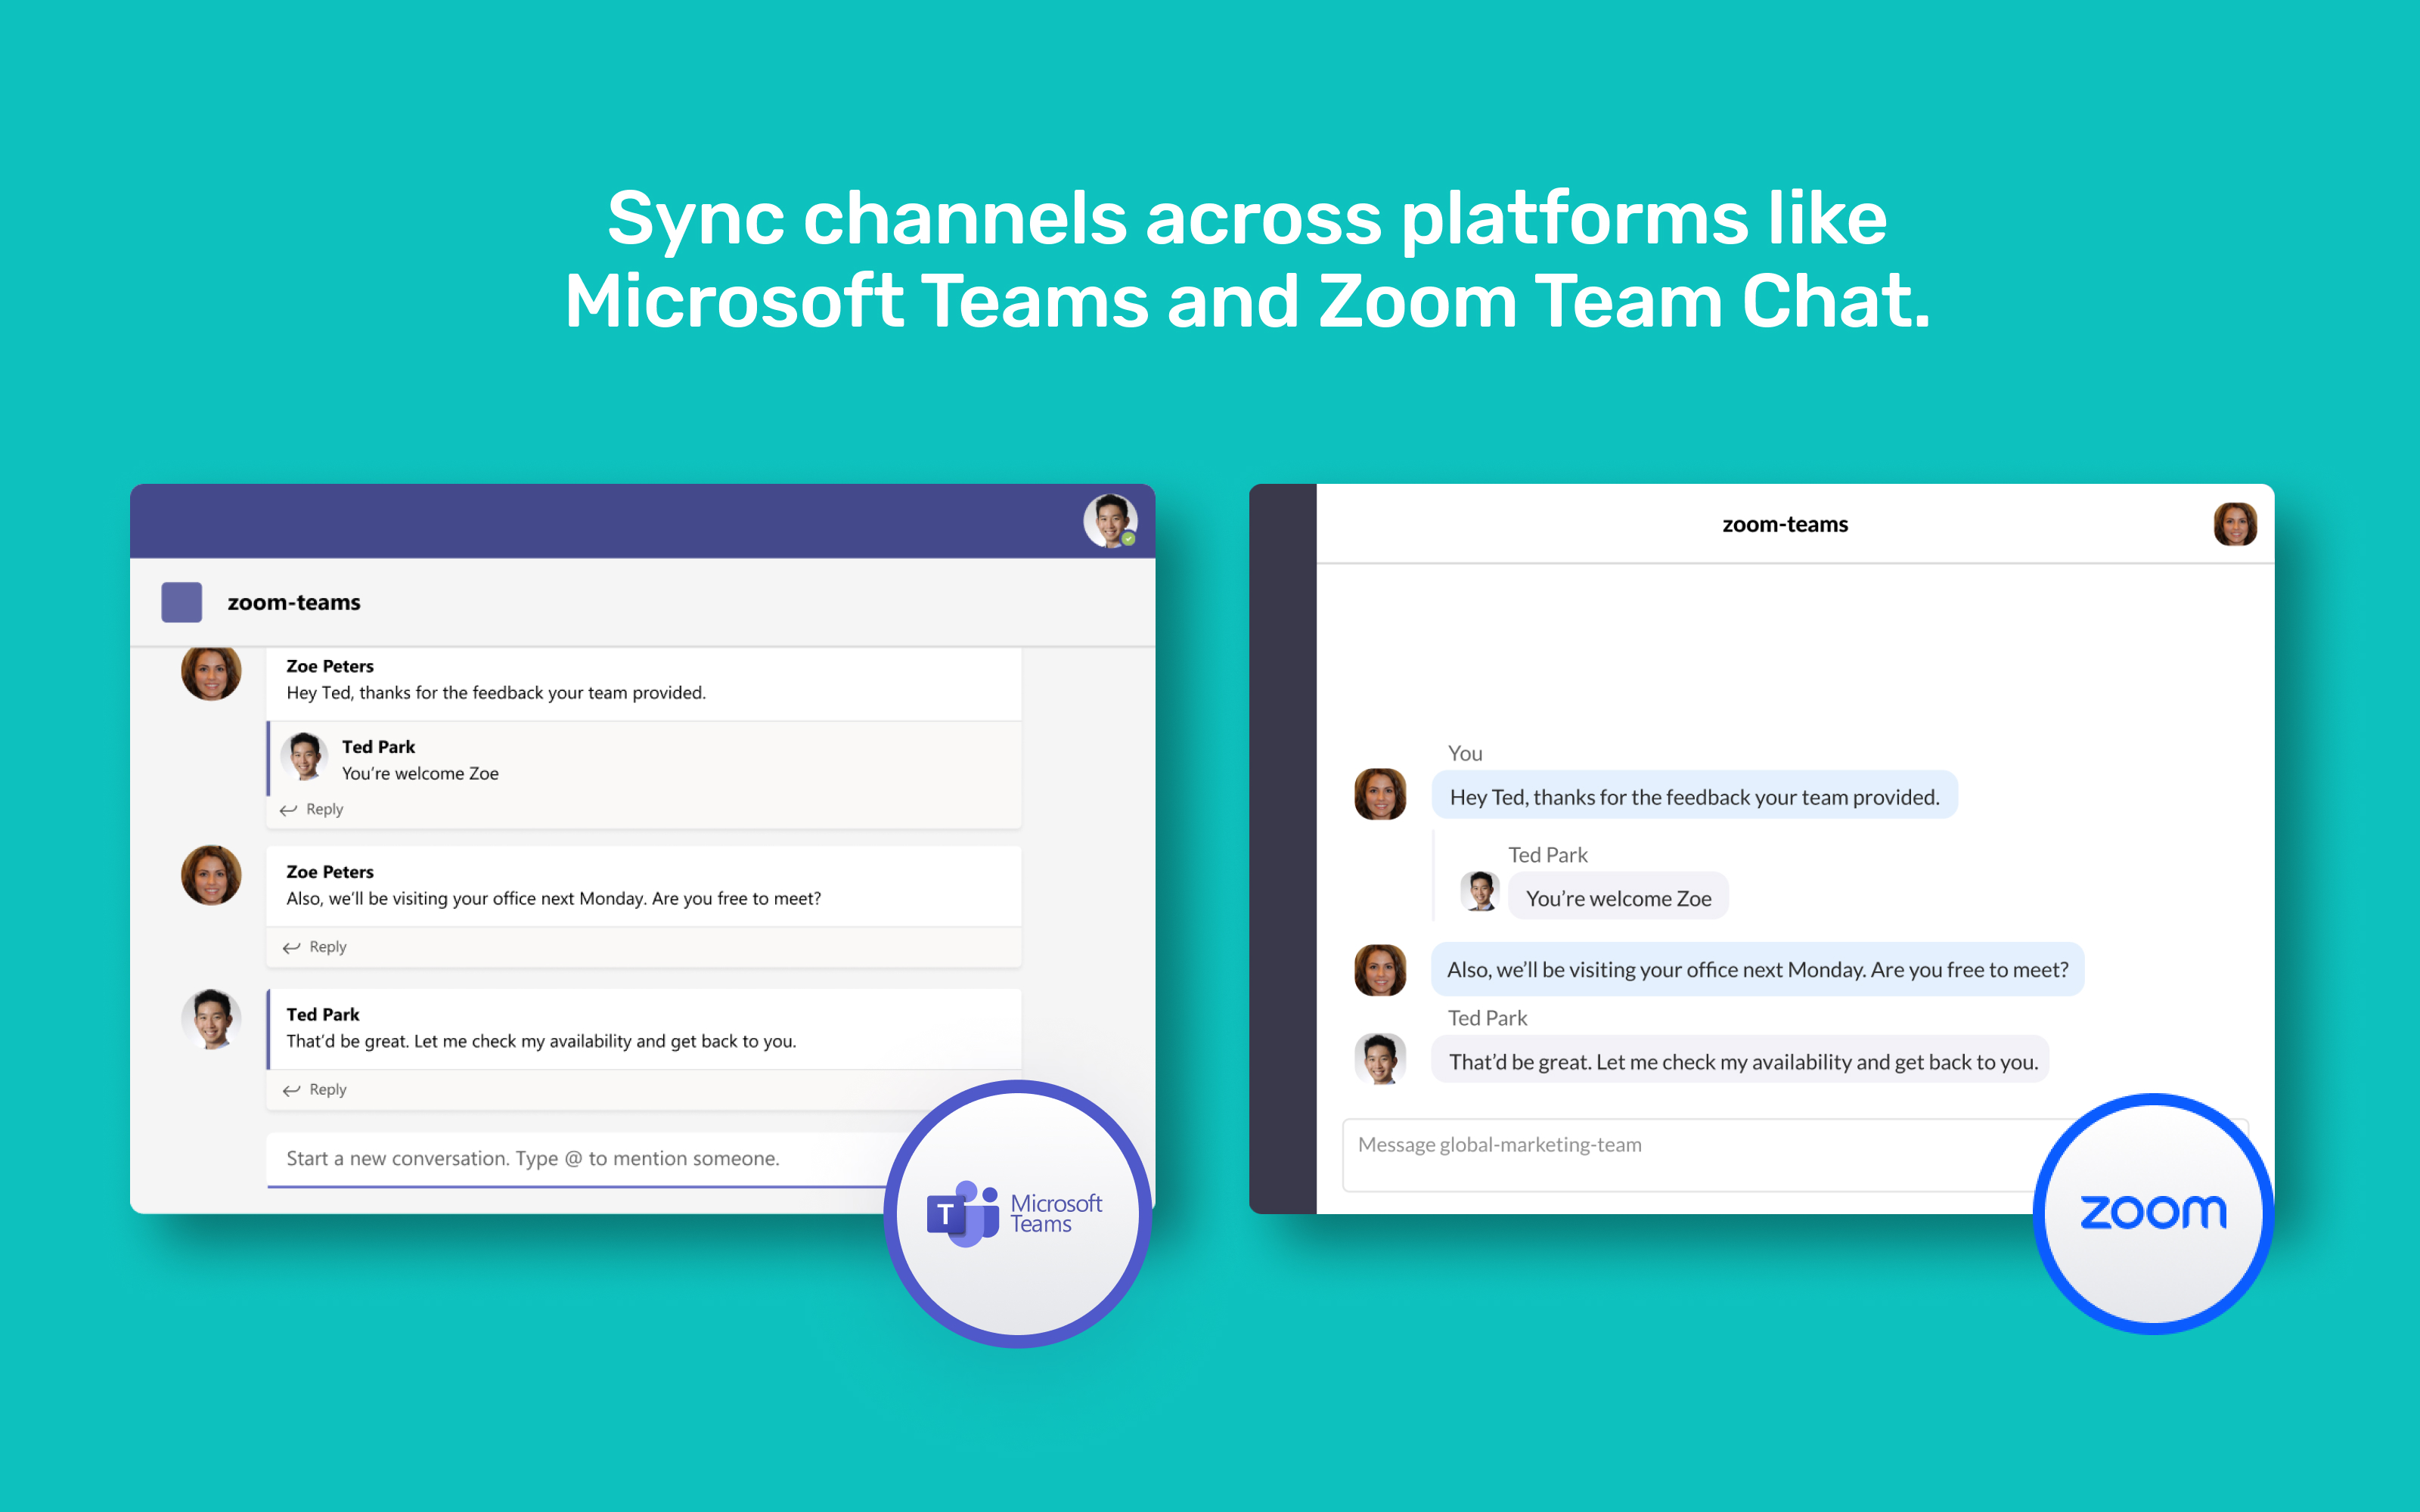 Sync channels MS Teams, Zoom Team Chat, Webex, and Slack.